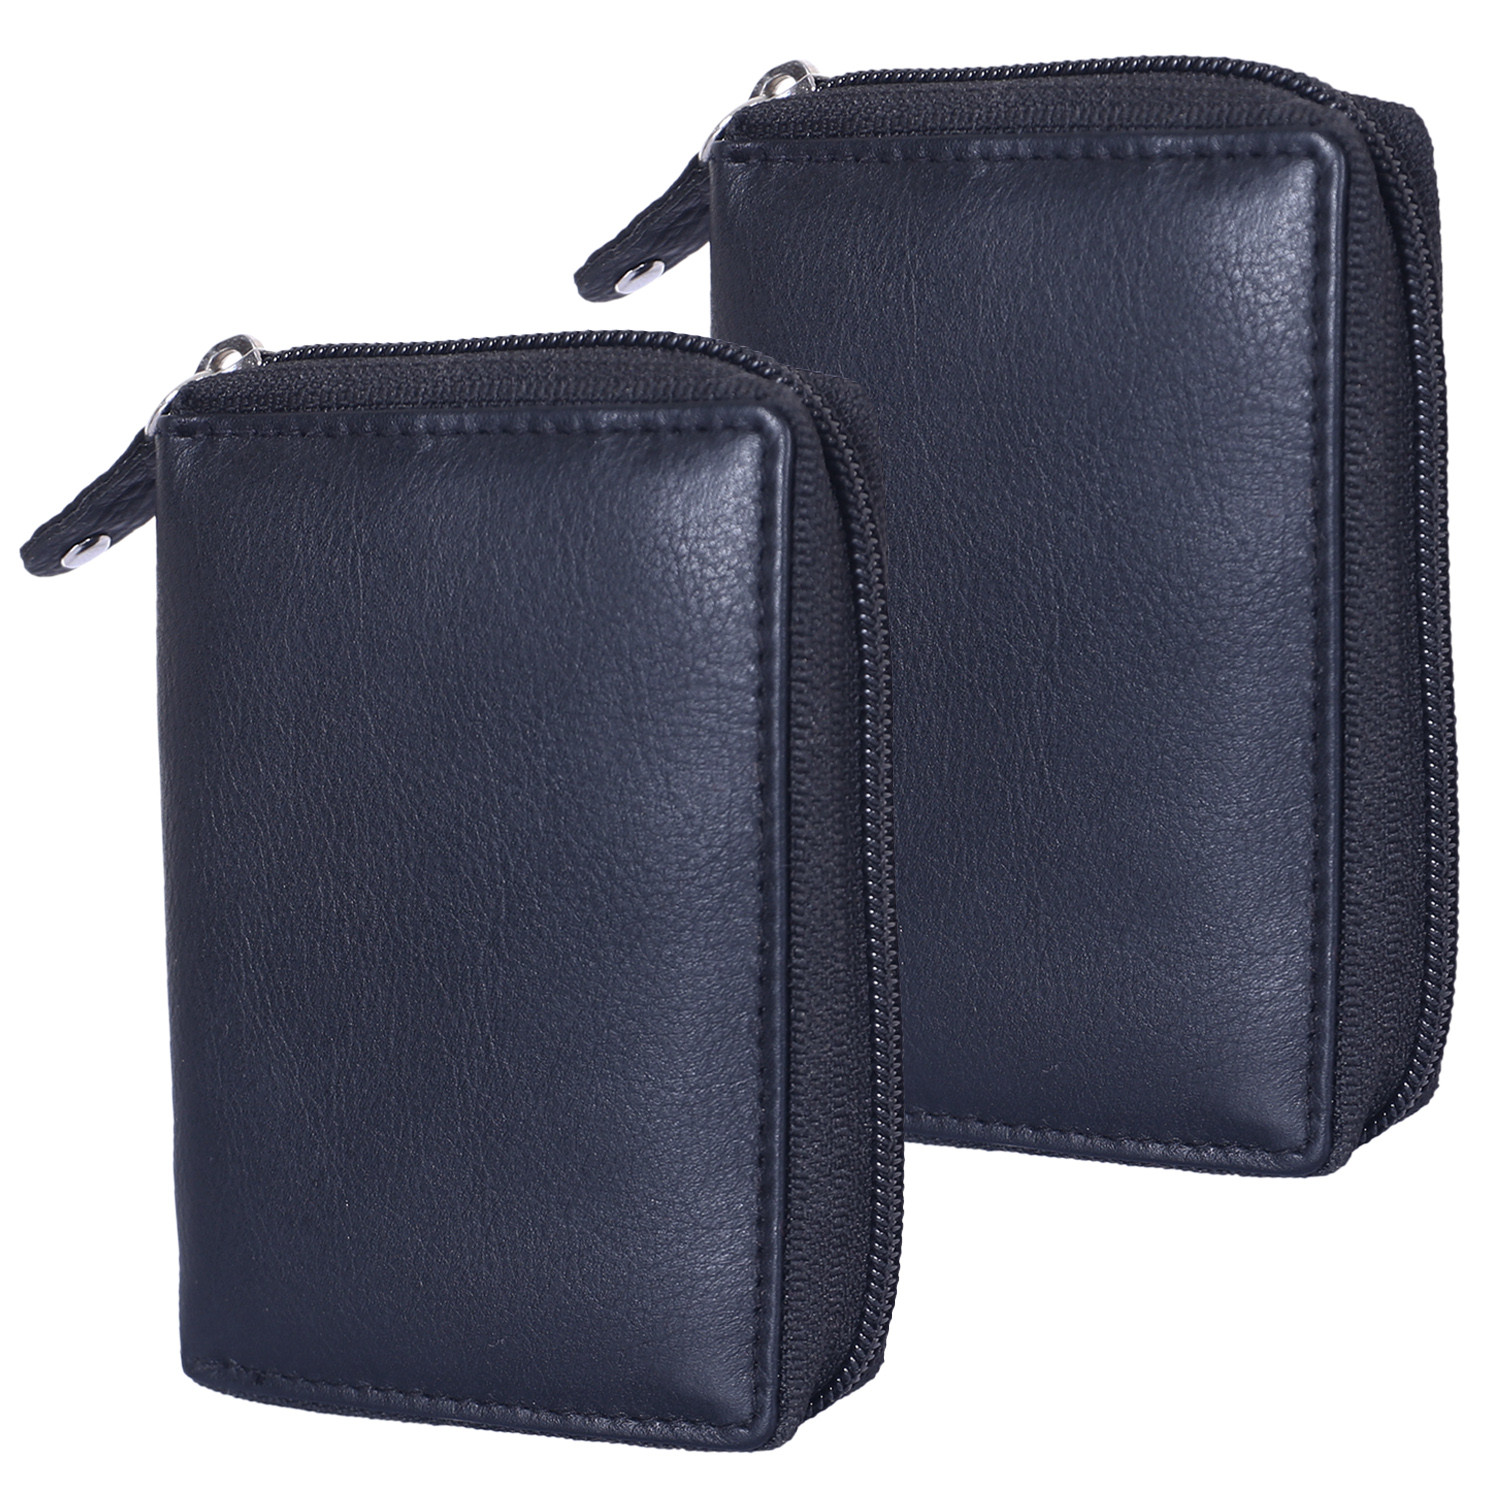 Kuber Industries Soft Leather Card Holder | Zipper Wallet For Man & Woman With 11 Slot (Black)